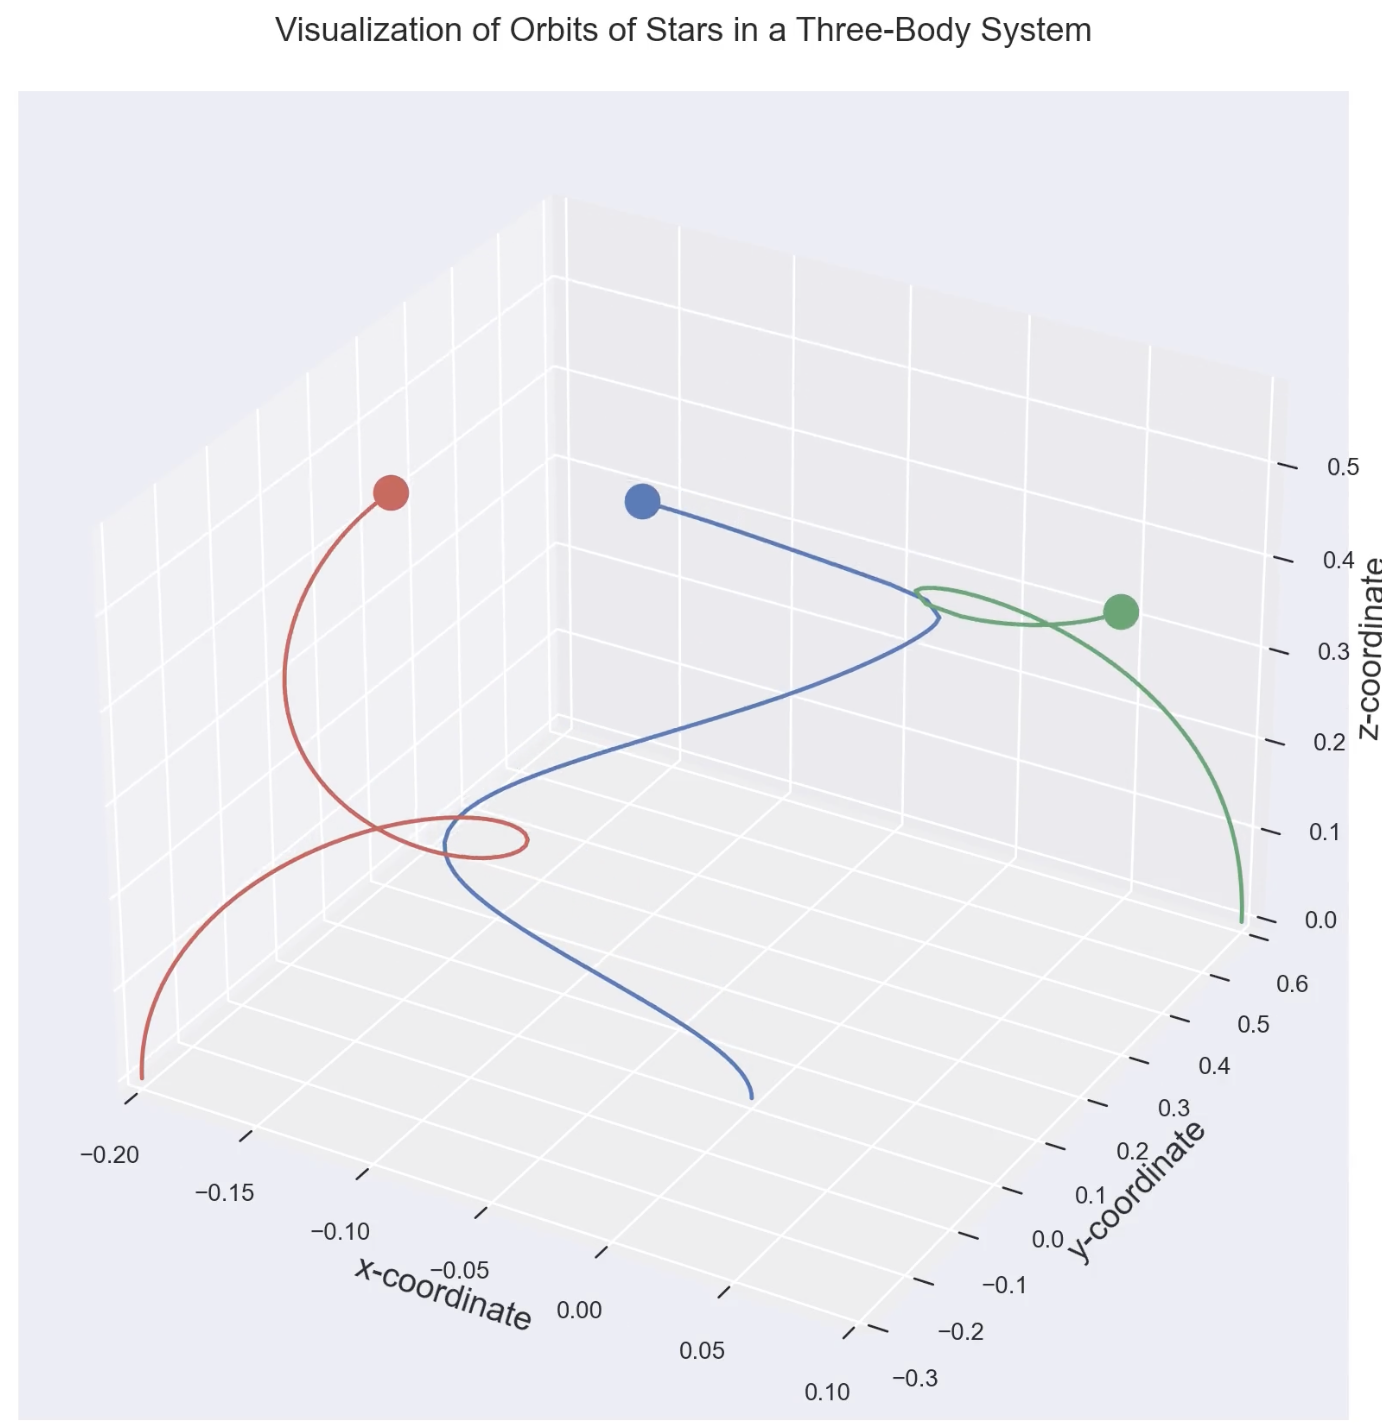 Modelling the Three-Body Problem in less than 200 lines of Python code